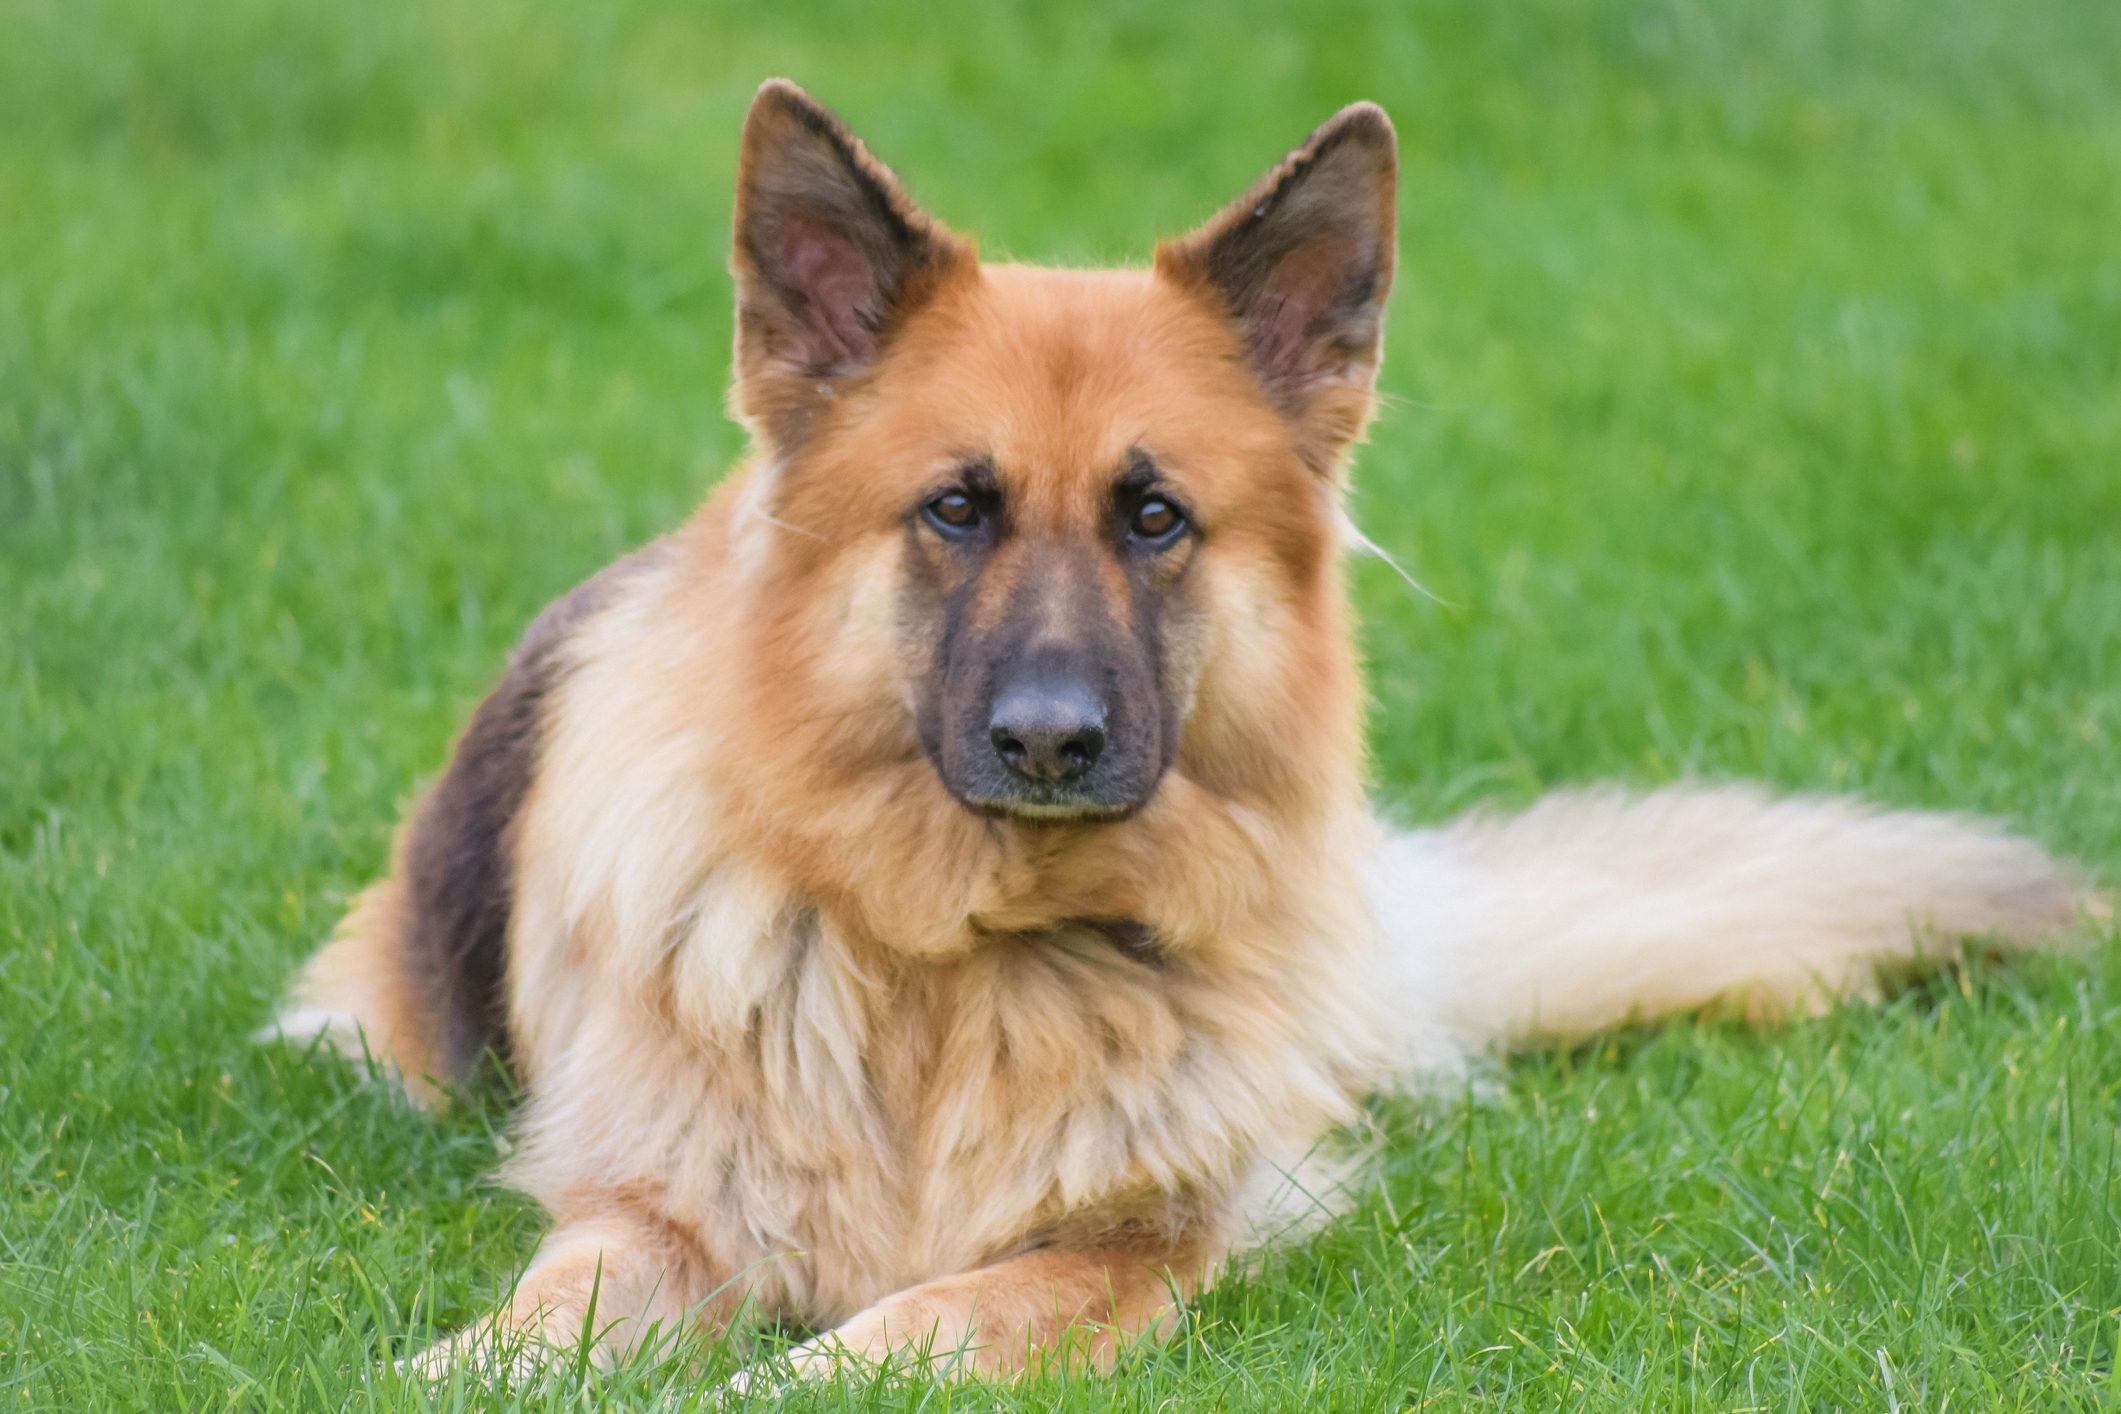 13 big dog breeds: large dogs that are popular UK pets - from Newfoundland  to Doberman and German Shepherd